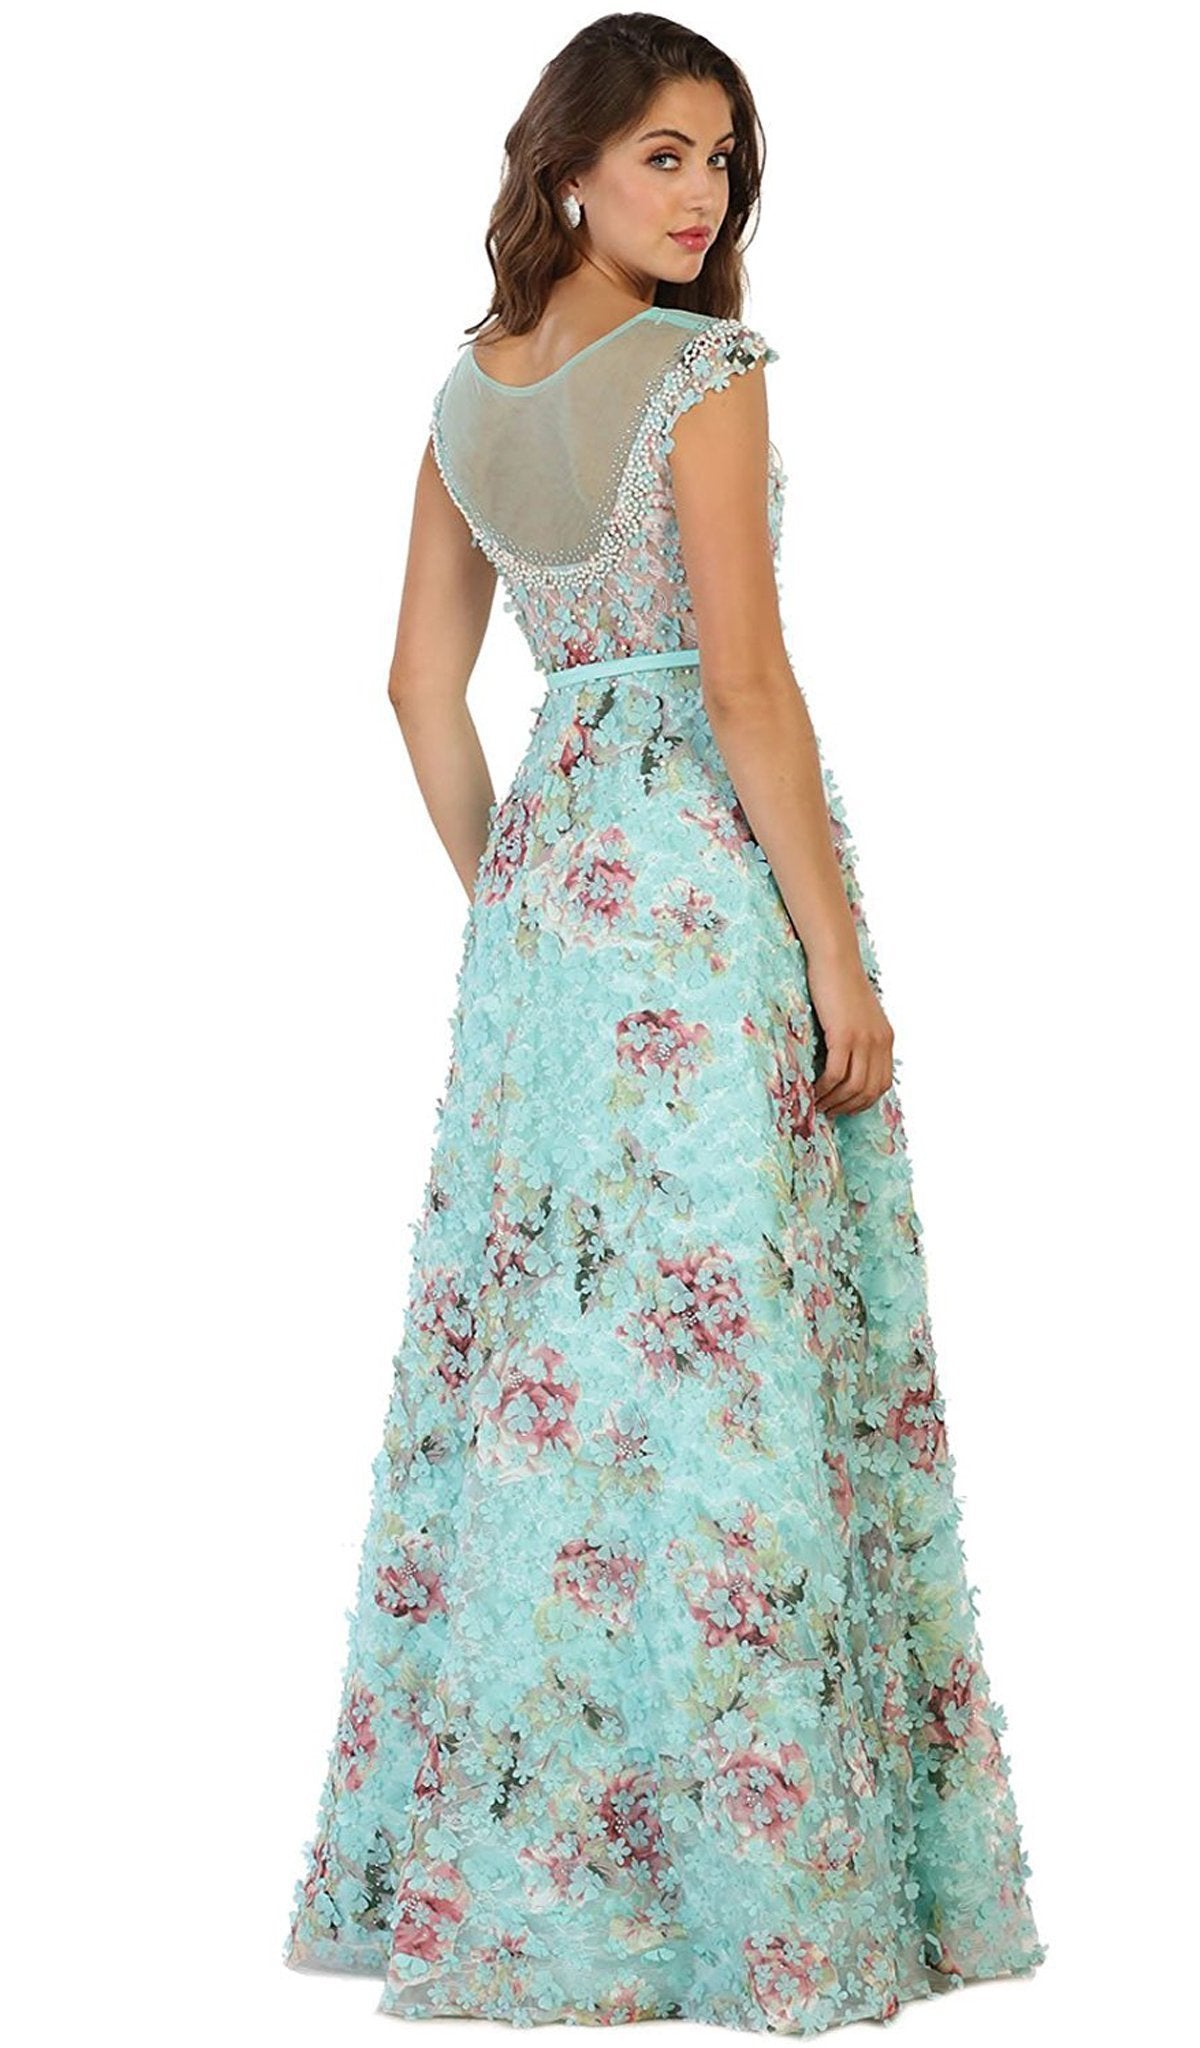 May Queen - RQ7554 Cap Sleeve Floral Embellished A-line Evening Gown In Blue